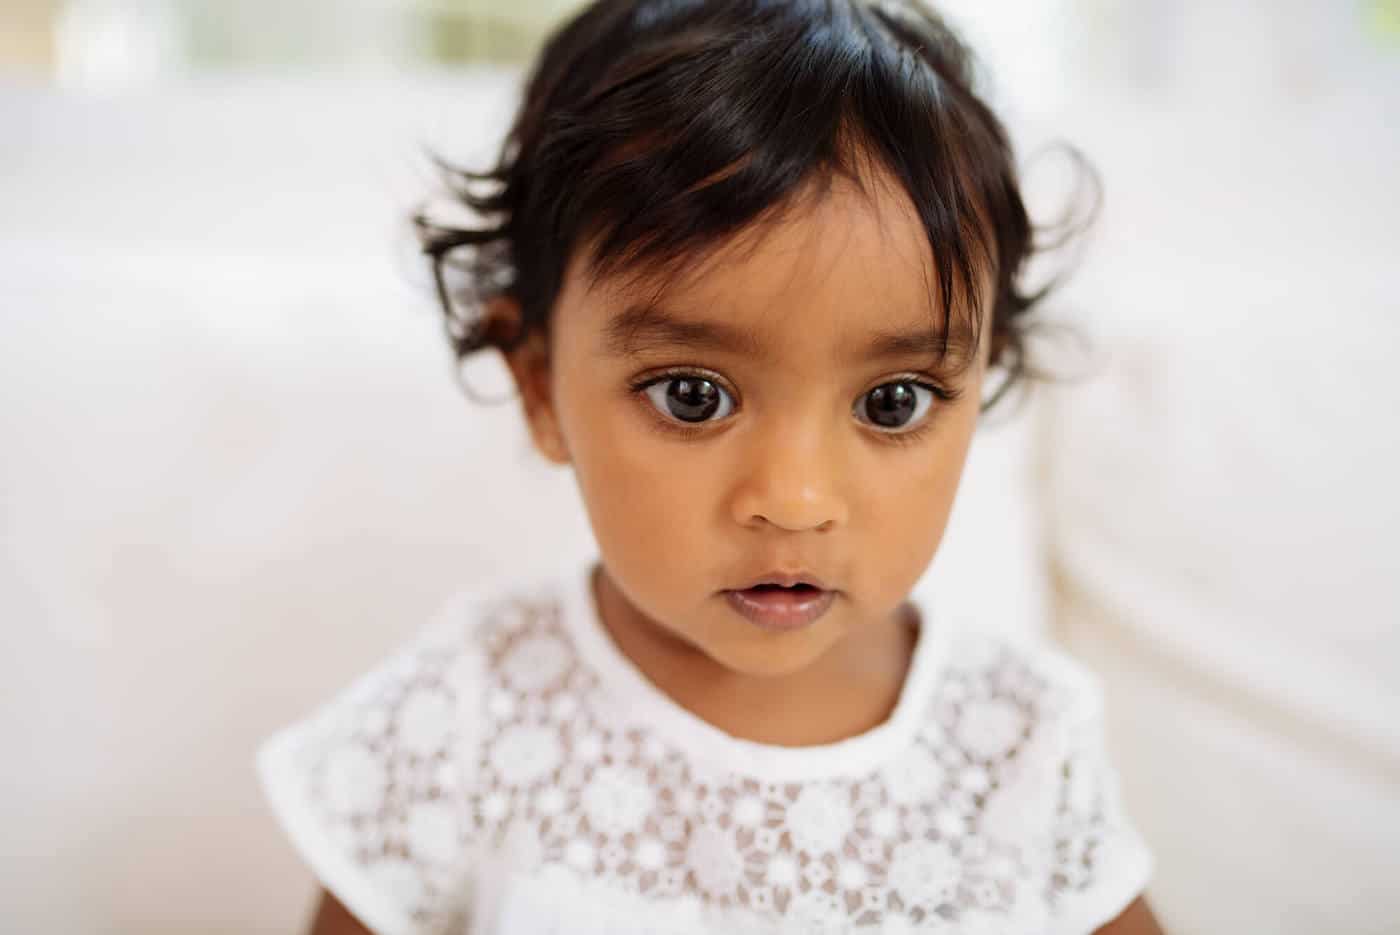 little girl with dark eyes and white dress